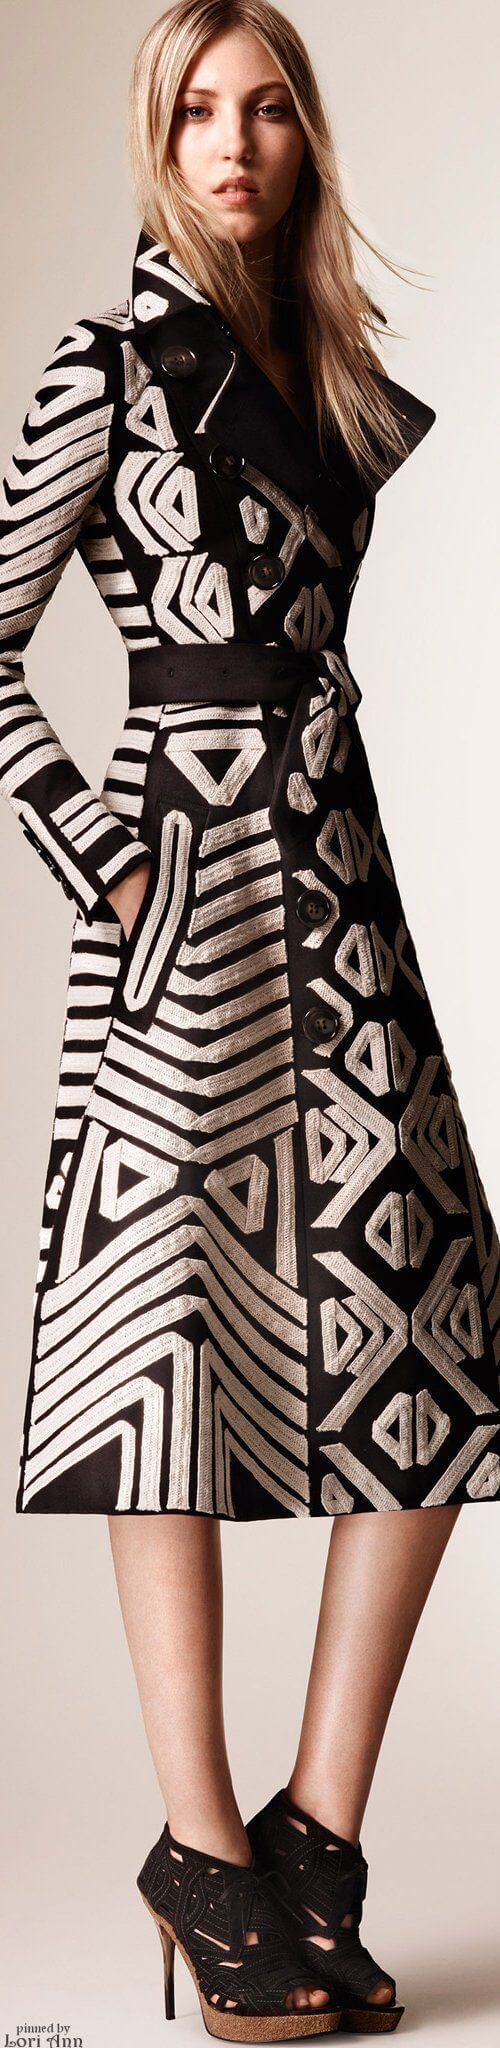 Extravagant and bold, this black and white geometric pattern is perfect for showing your style during fall times.